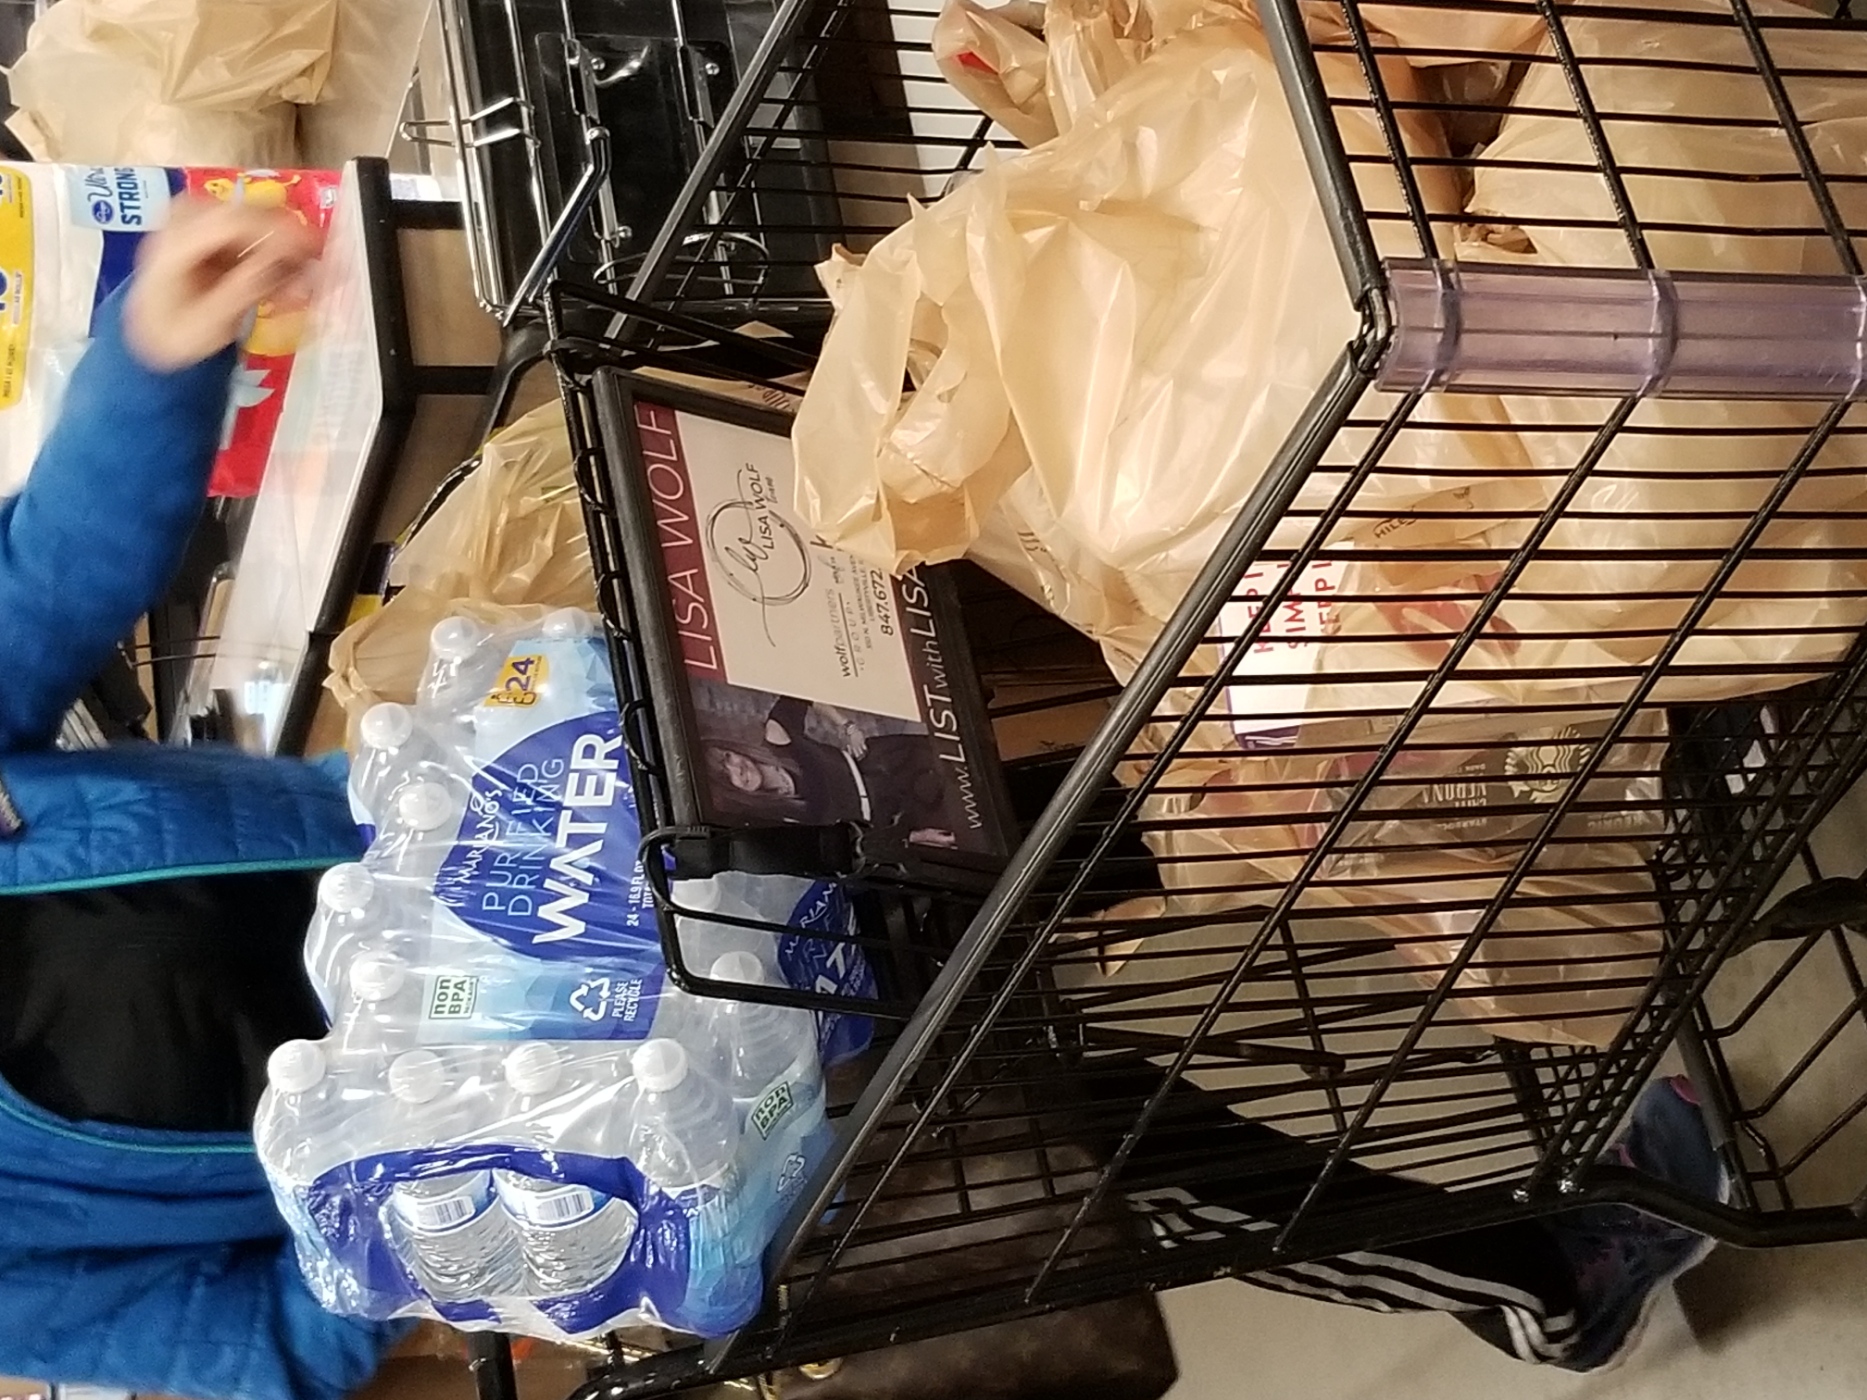 Plastic waste and grocery shopping by Sharon Starr